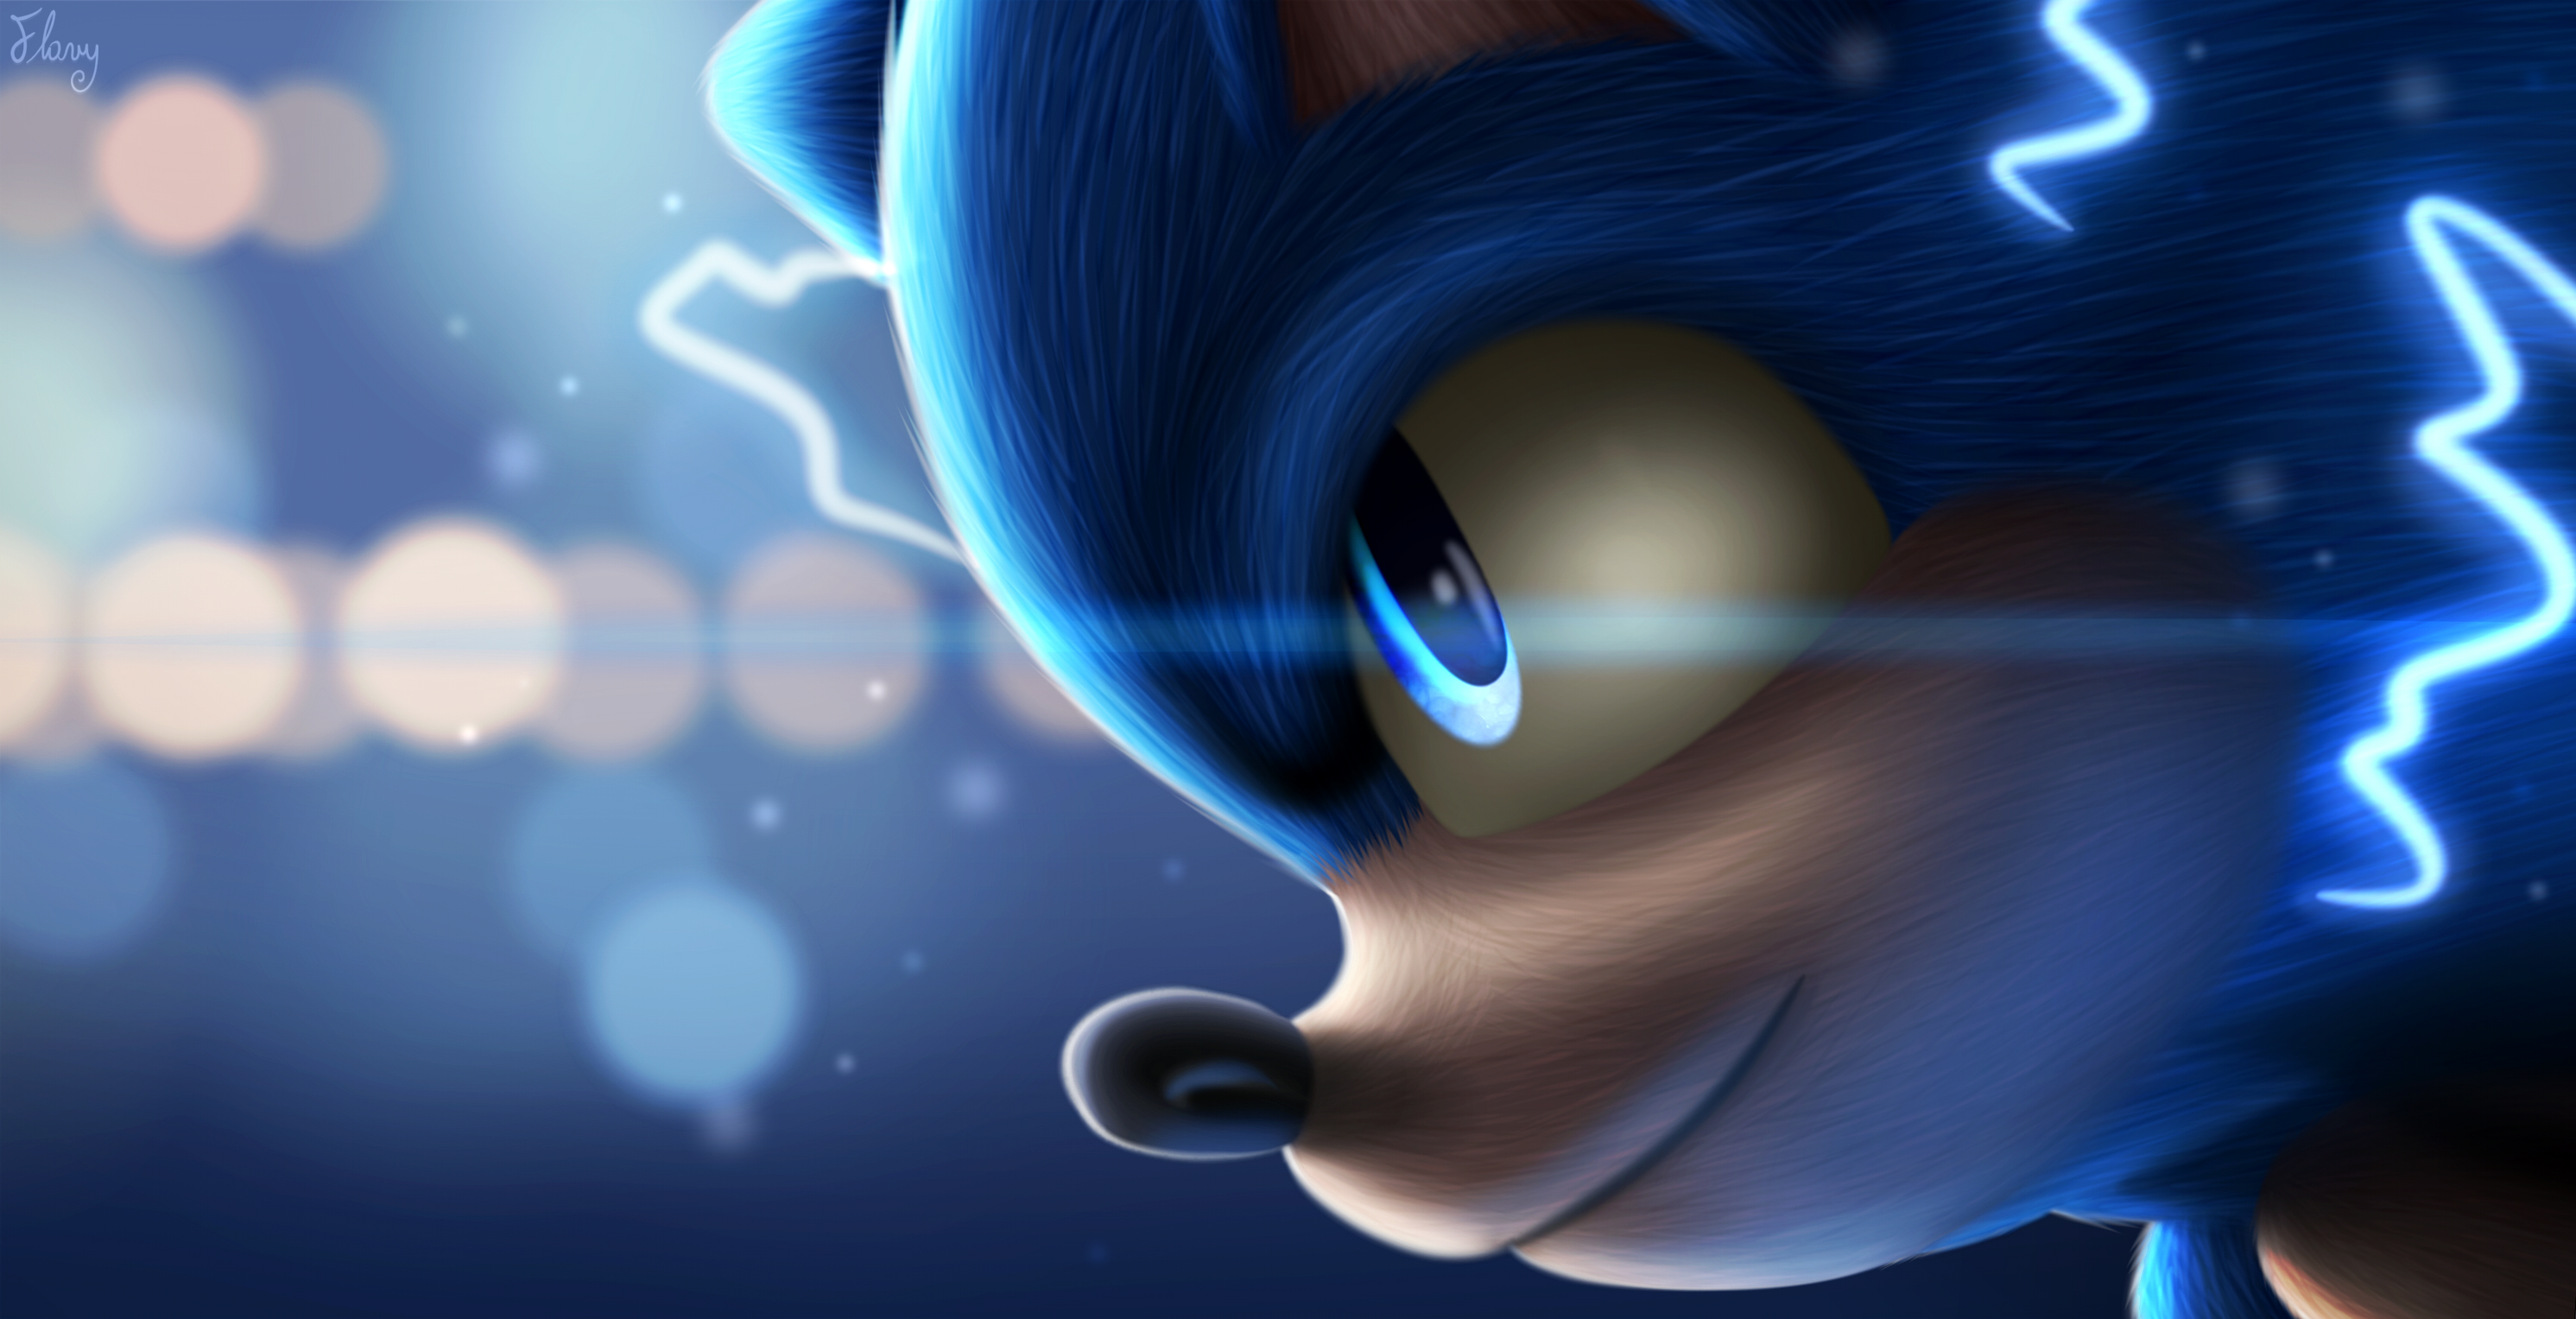 10. Sonic the Hedgehog: Pronouns and Diversity in Gaming - wide 5